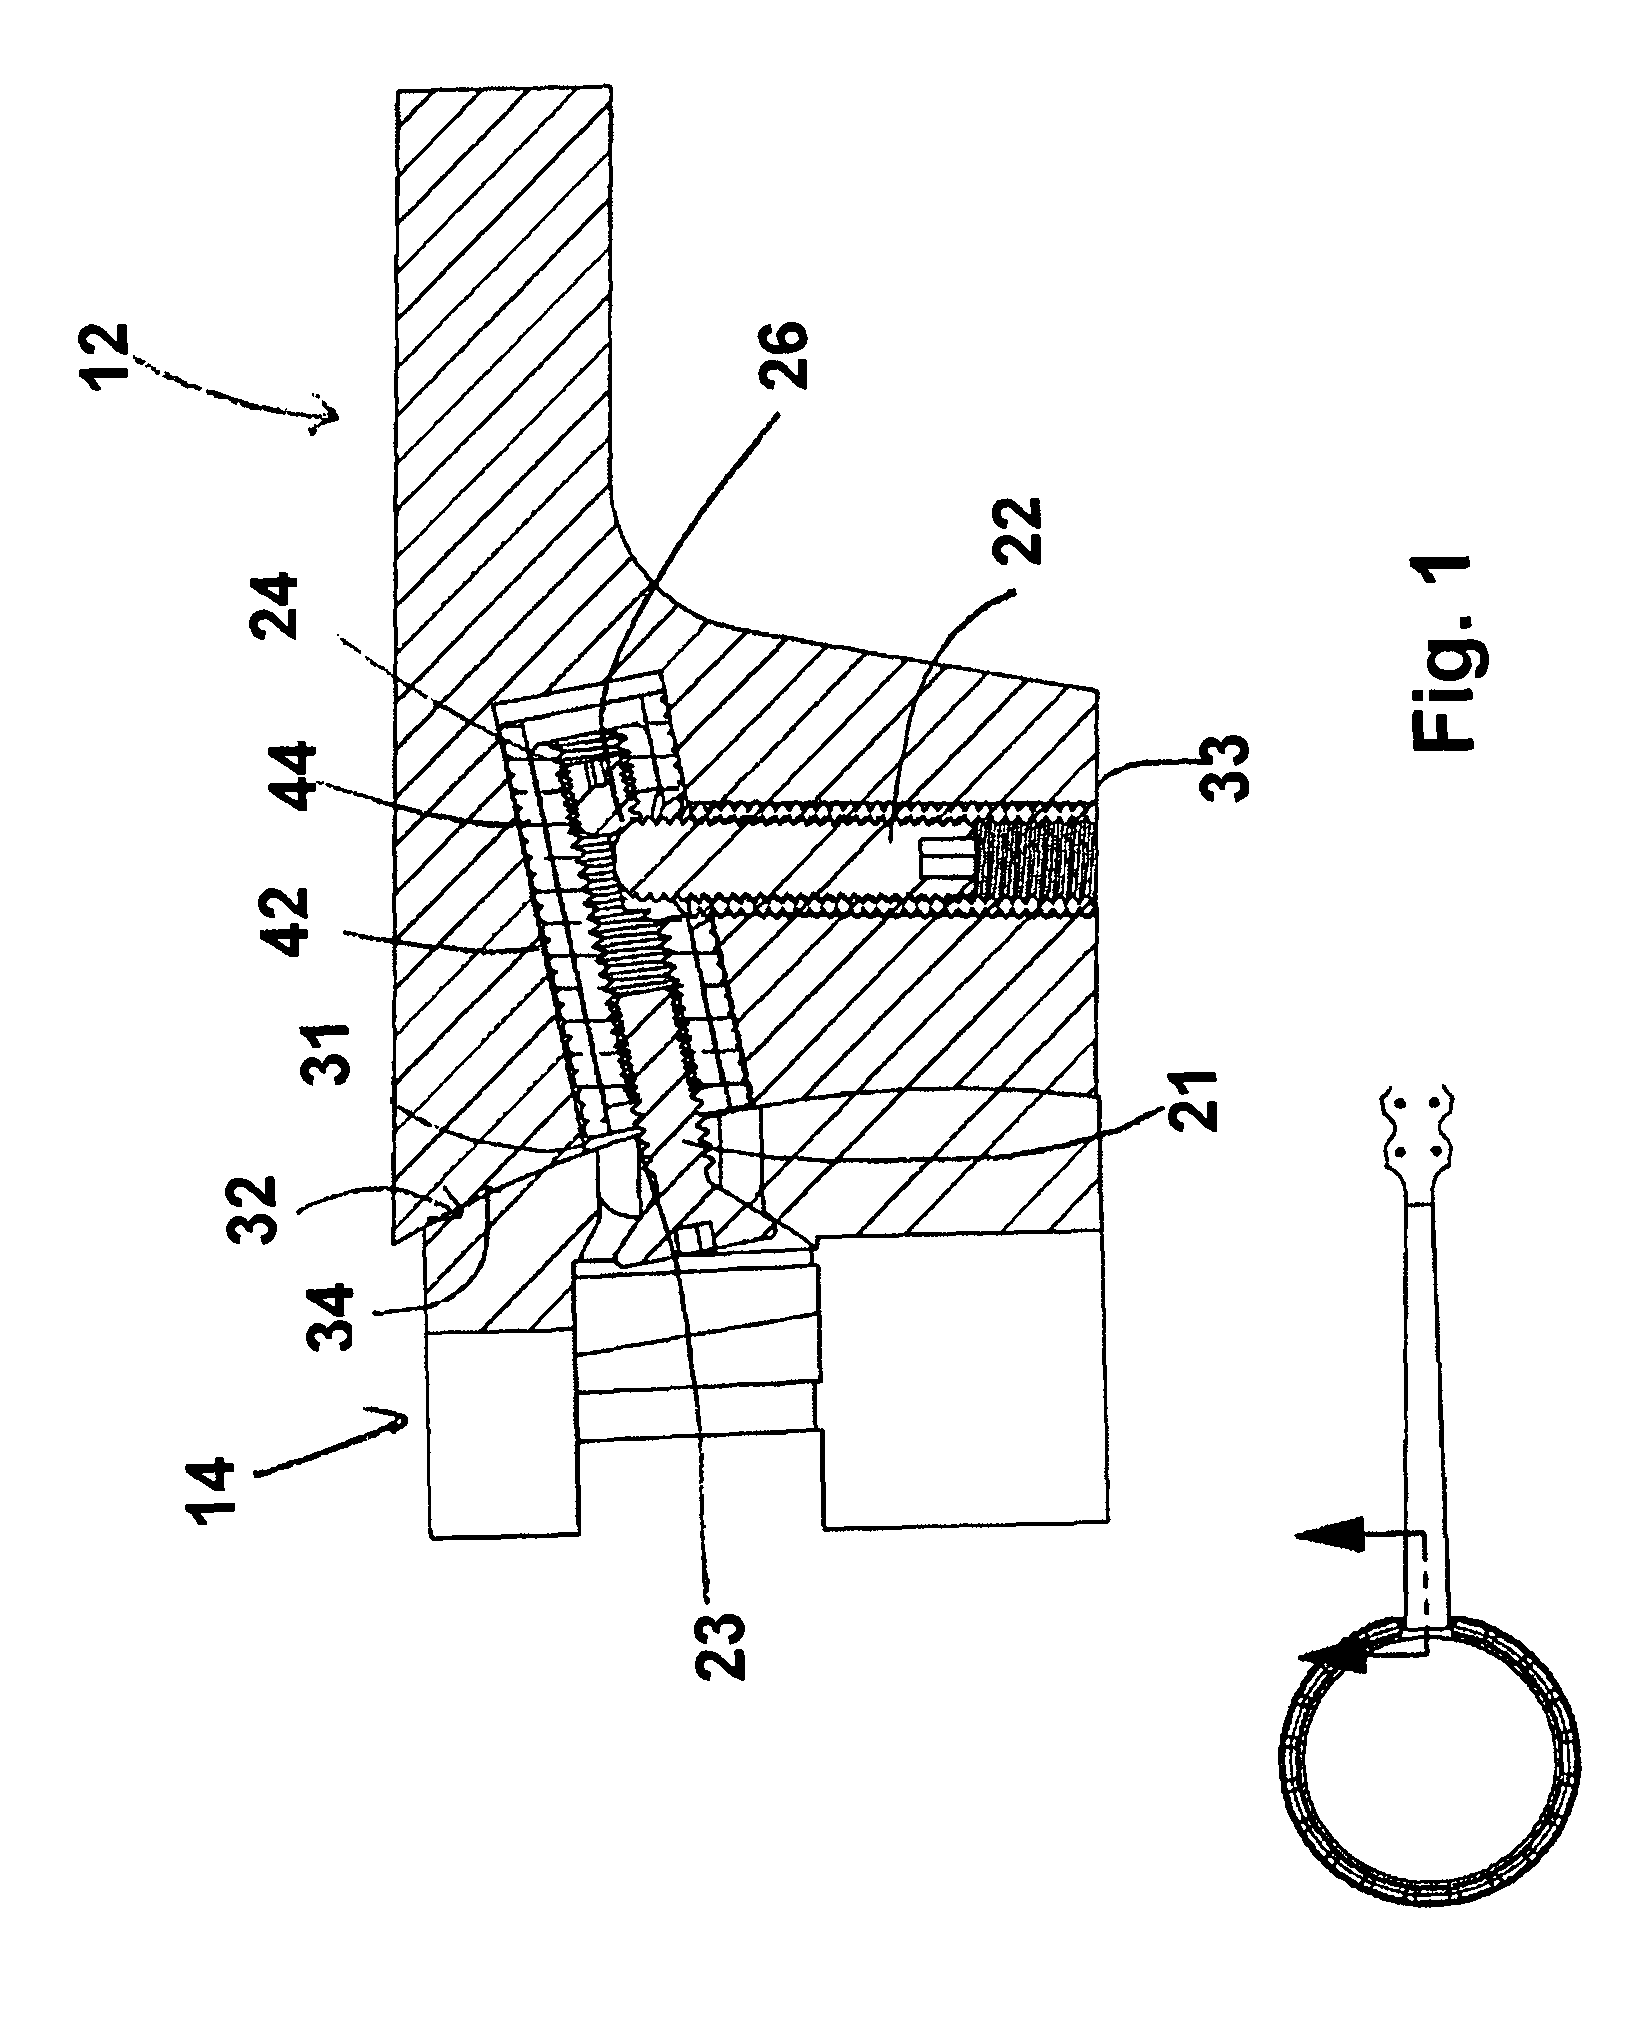 Adjustable and removable neck for a stringed instrument